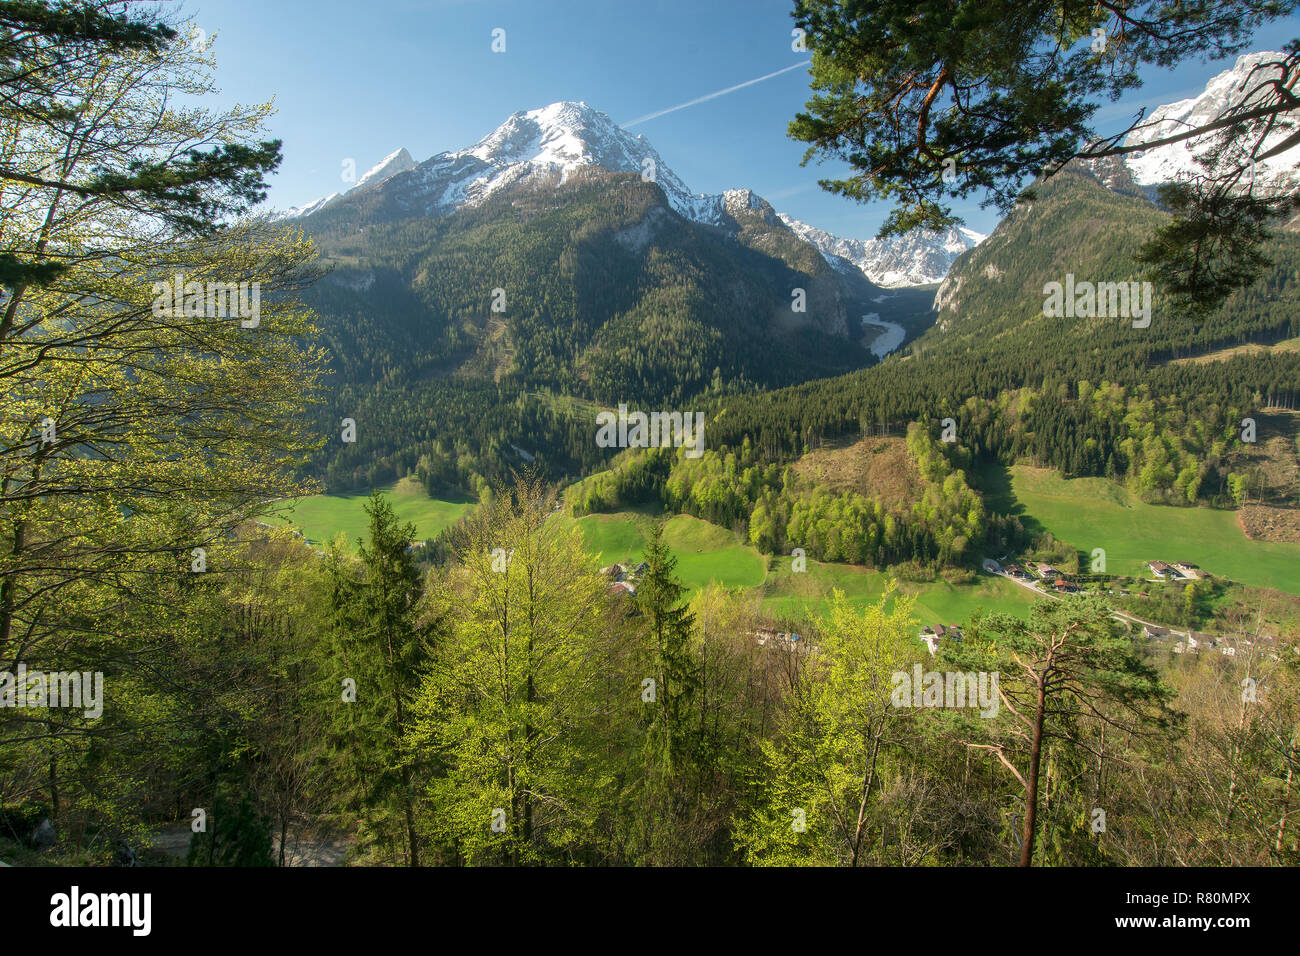 The mountains Watzmann and Hochkalter and the Wimbachtal Valley in spring. Upper Bavaria, Germany Stock Photo